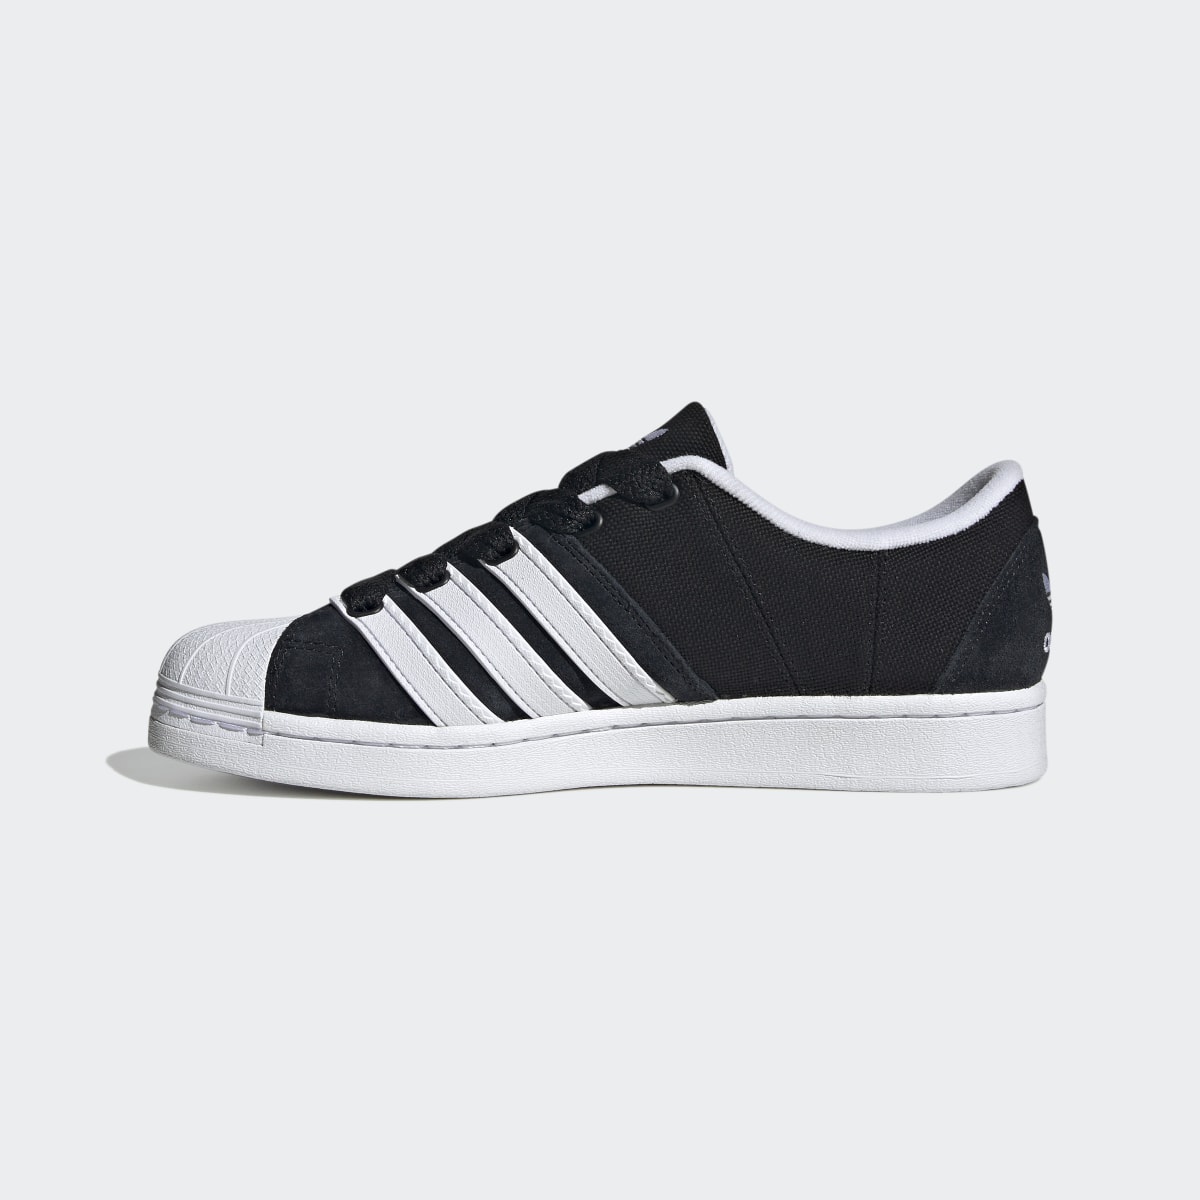 Adidas Superstar Supermodified Shoes. 7